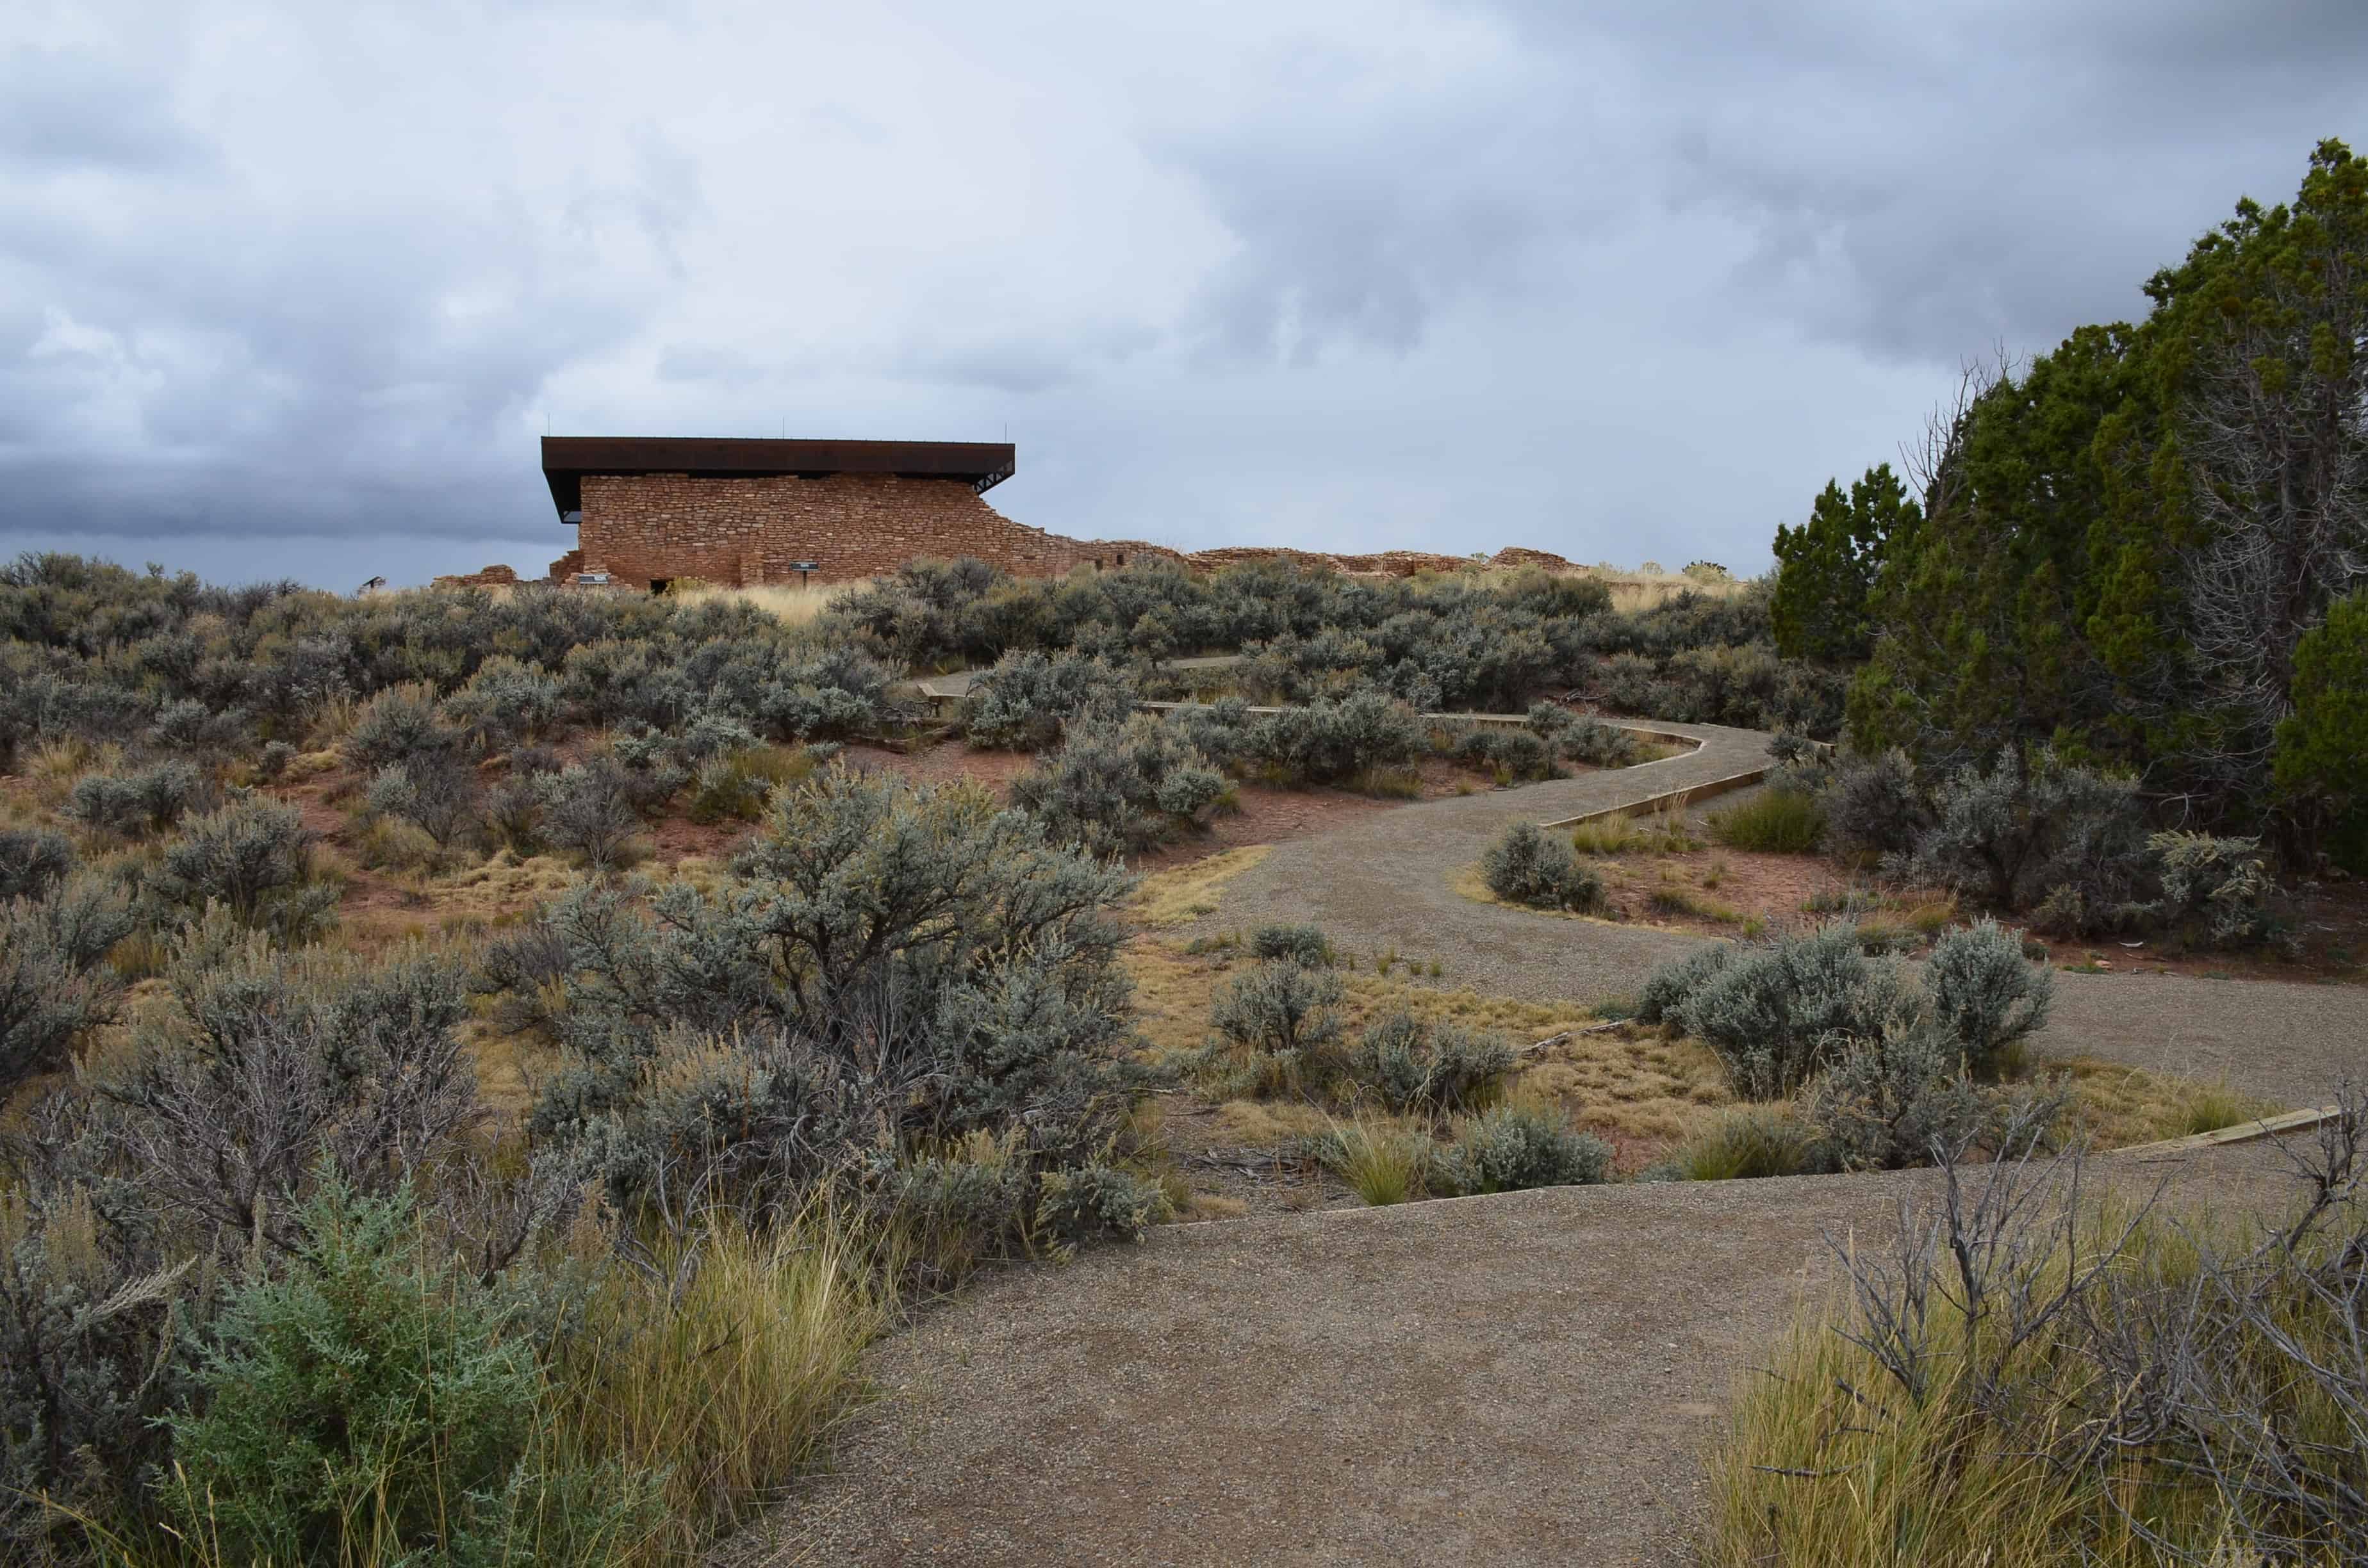 Looking back at Lowry Pueblo at Lowry Pueblo at Canyons of the Ancients National Monument in Colorado